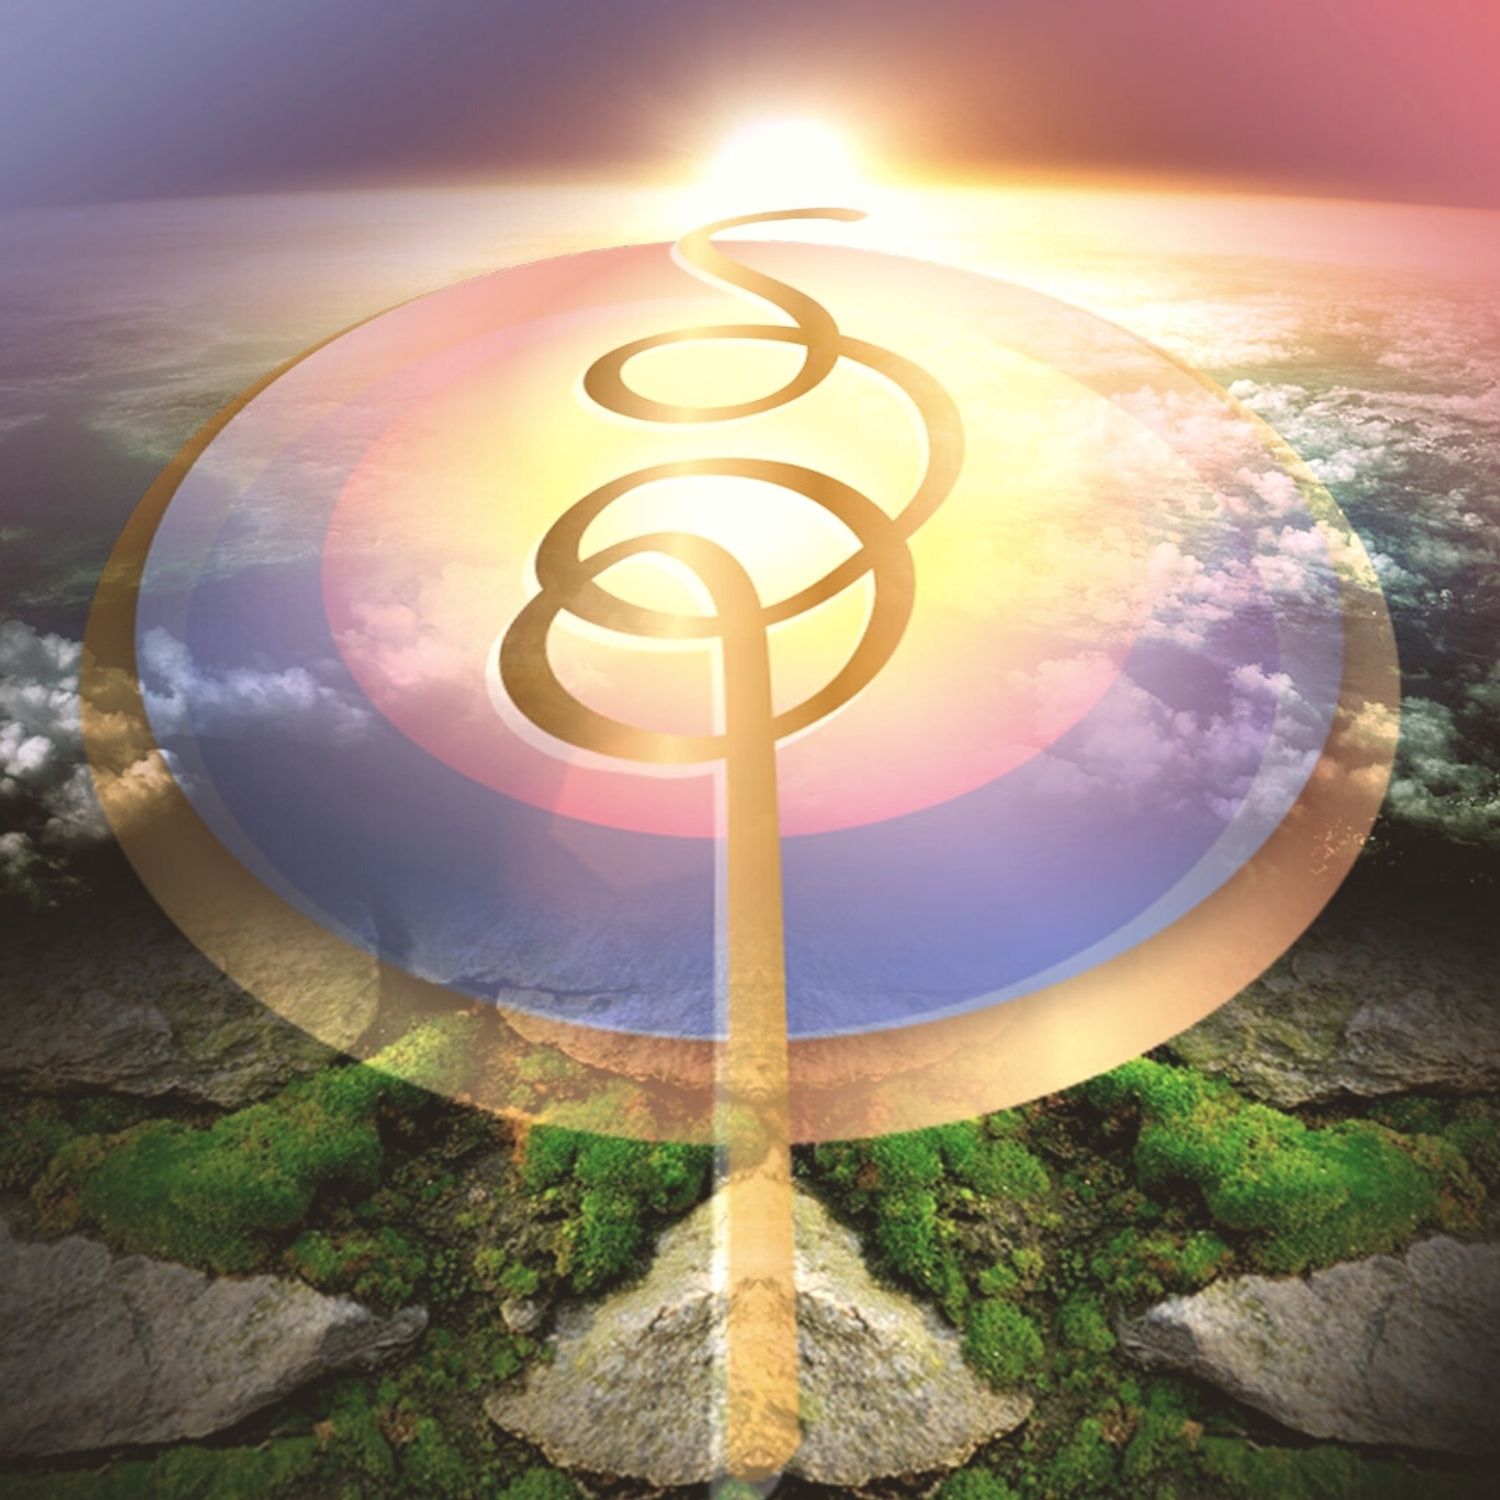 Sovereign Being symbol on earth